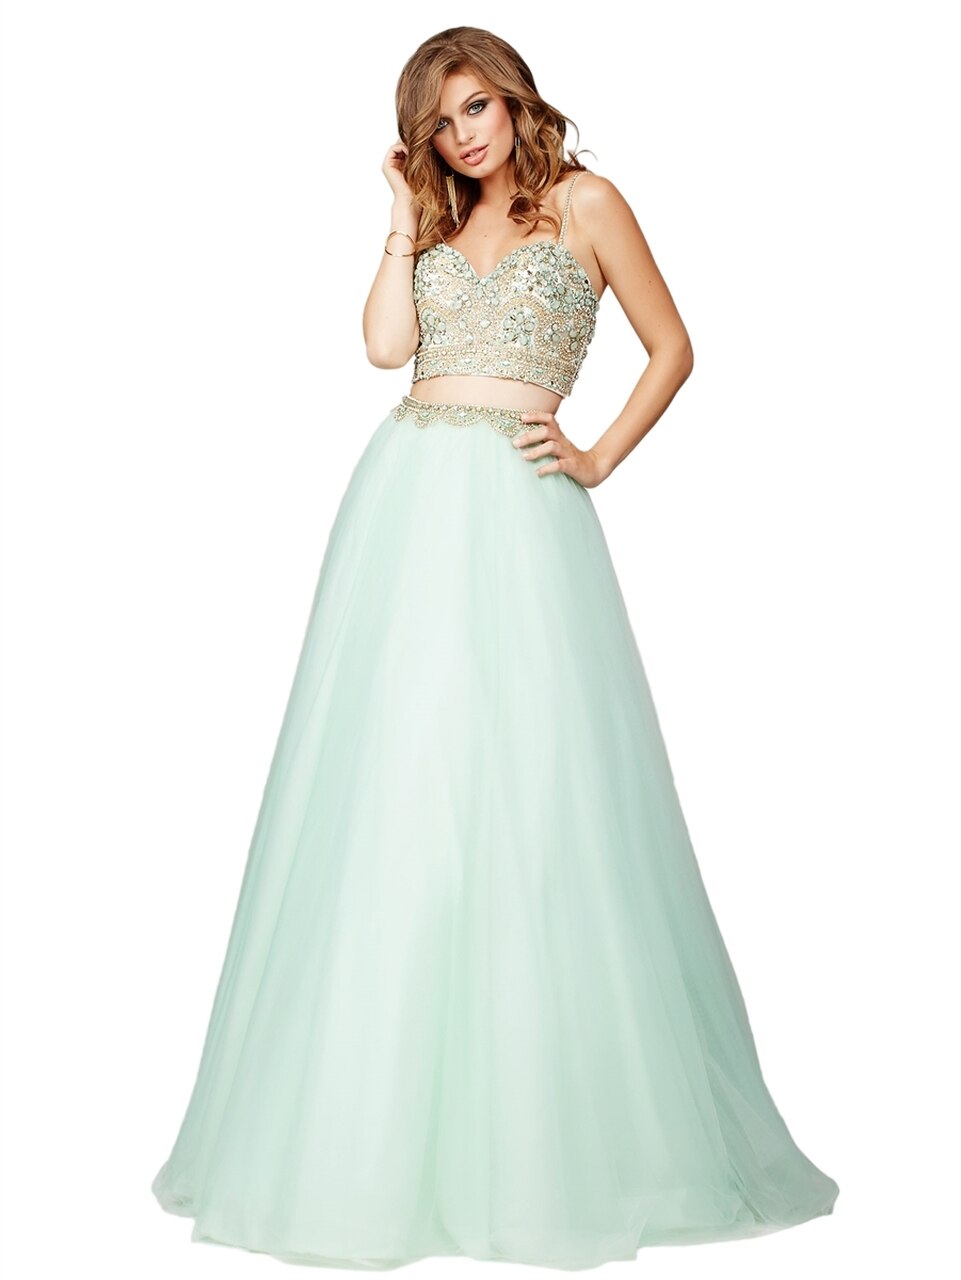 Jovani 33492 Size 4 Two Piece Prom Dress Mint Ballgown Pageant Gown